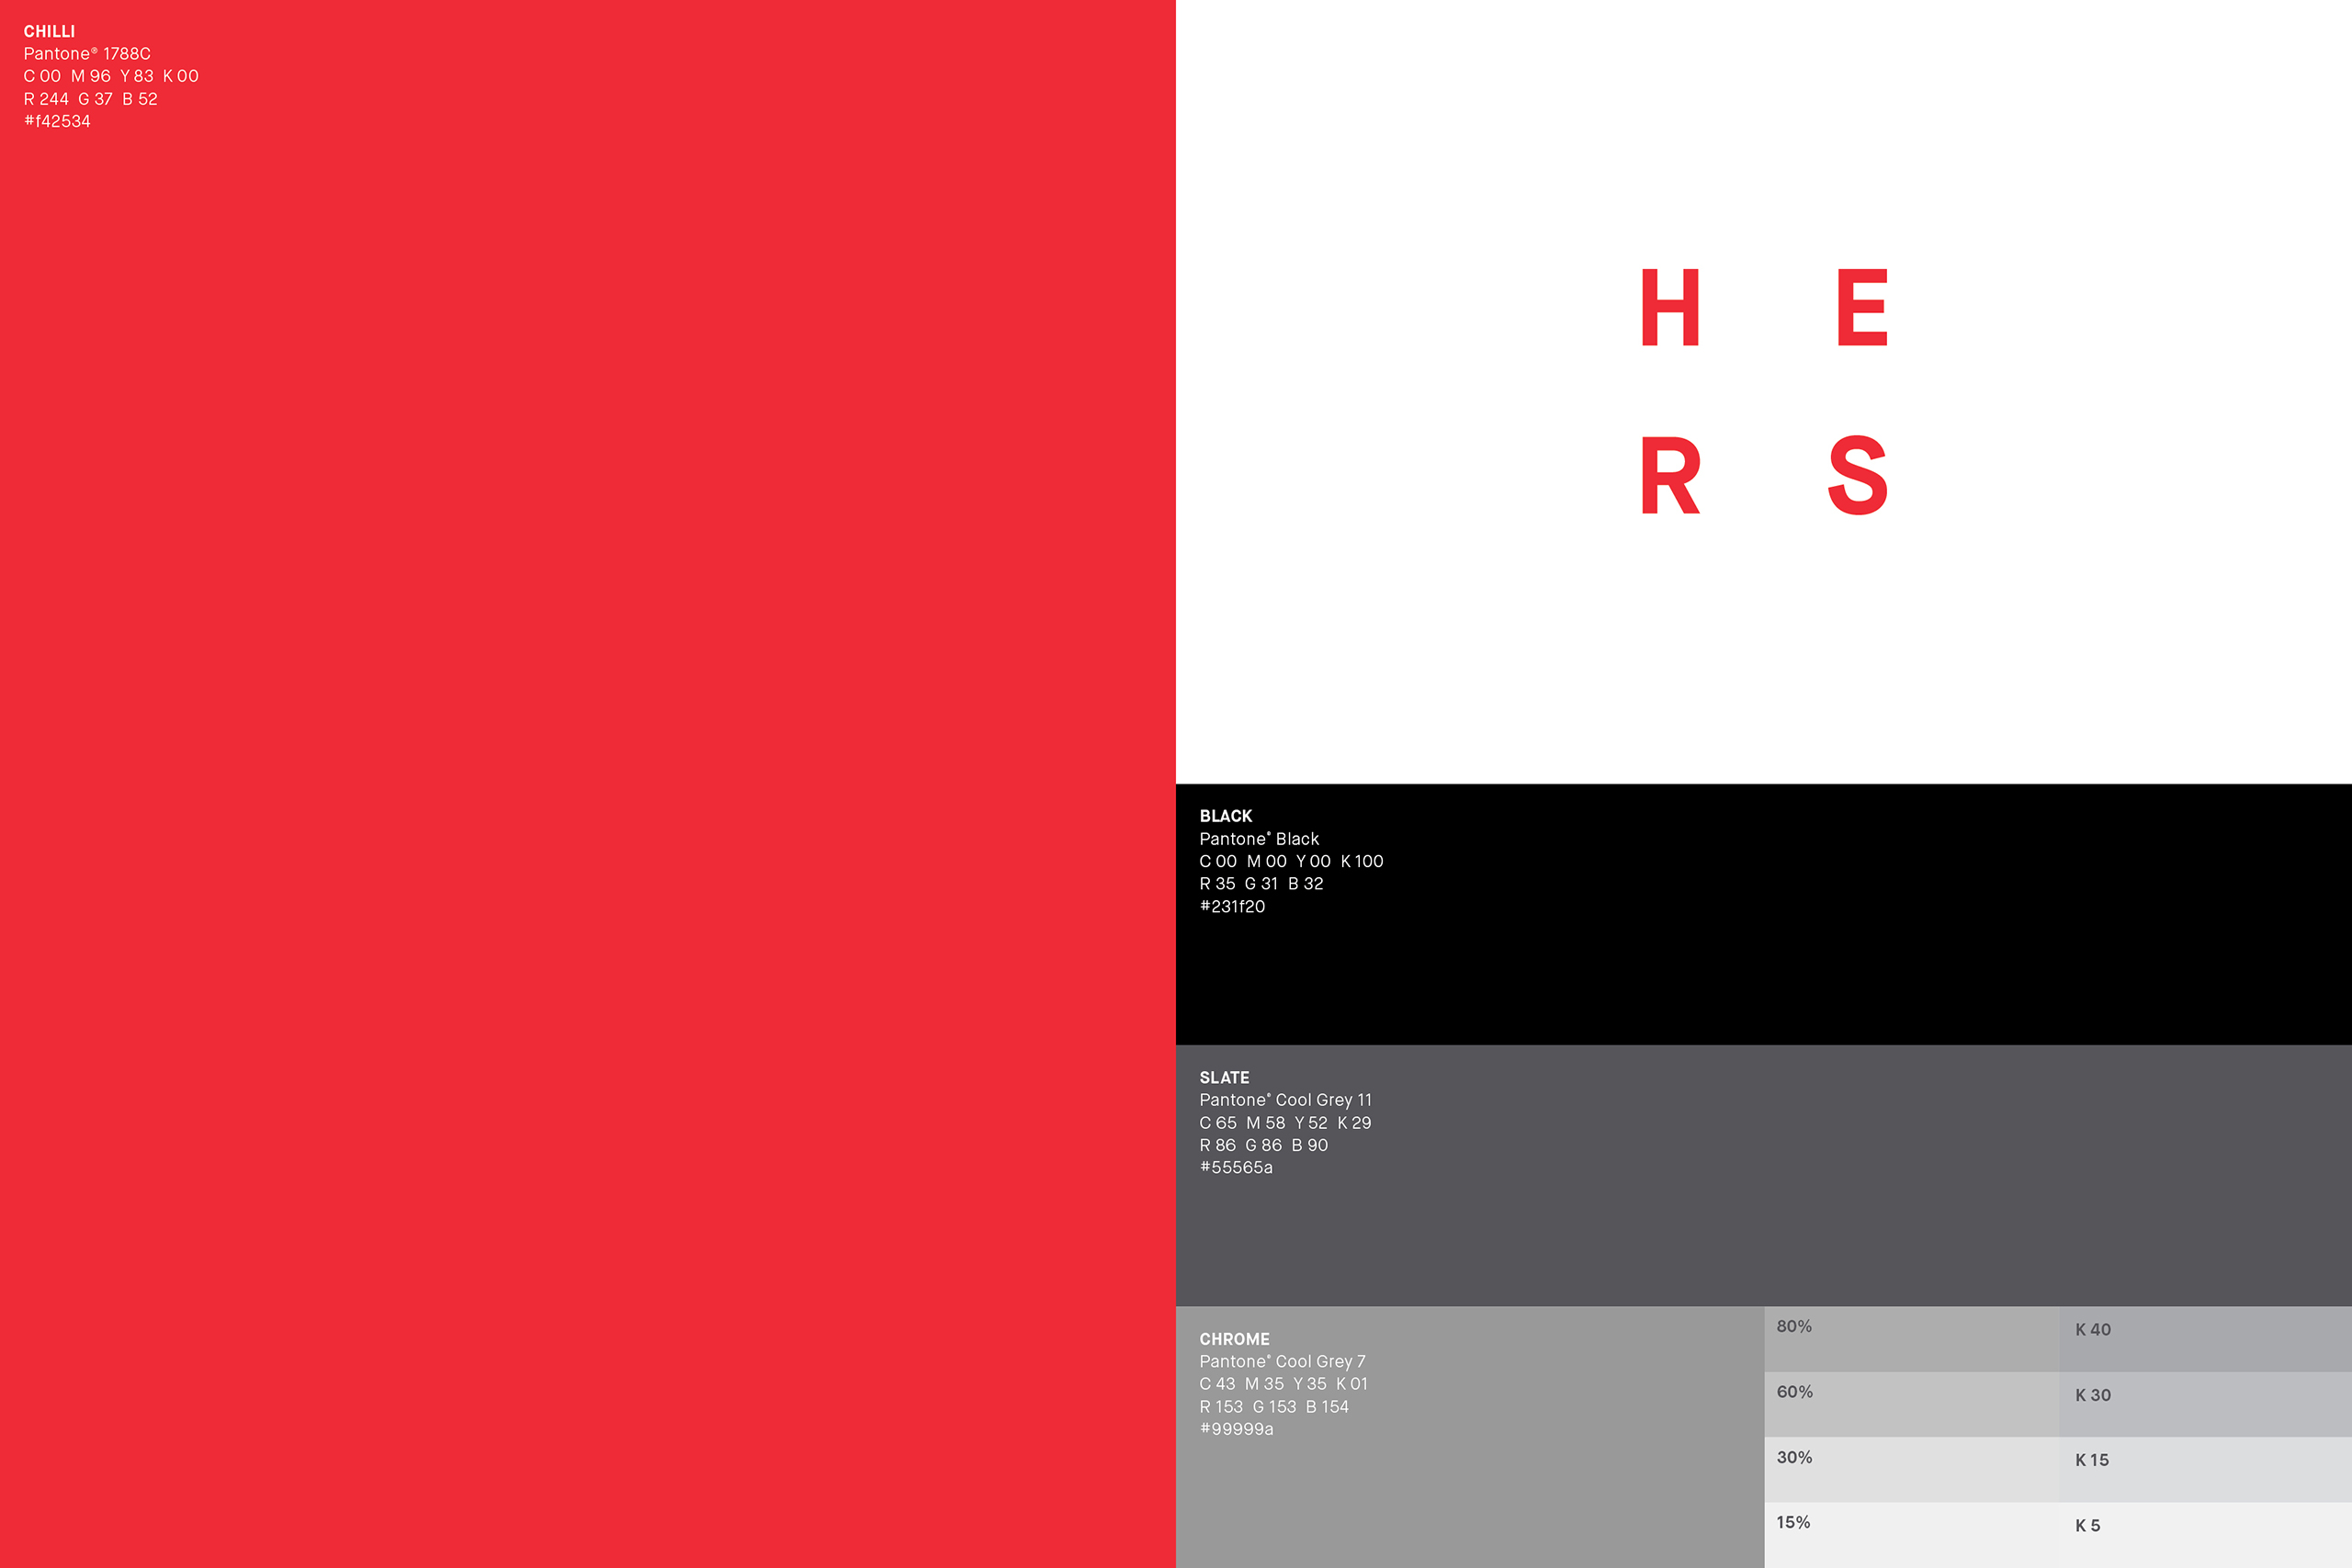 HERS Agency - Identity and applications